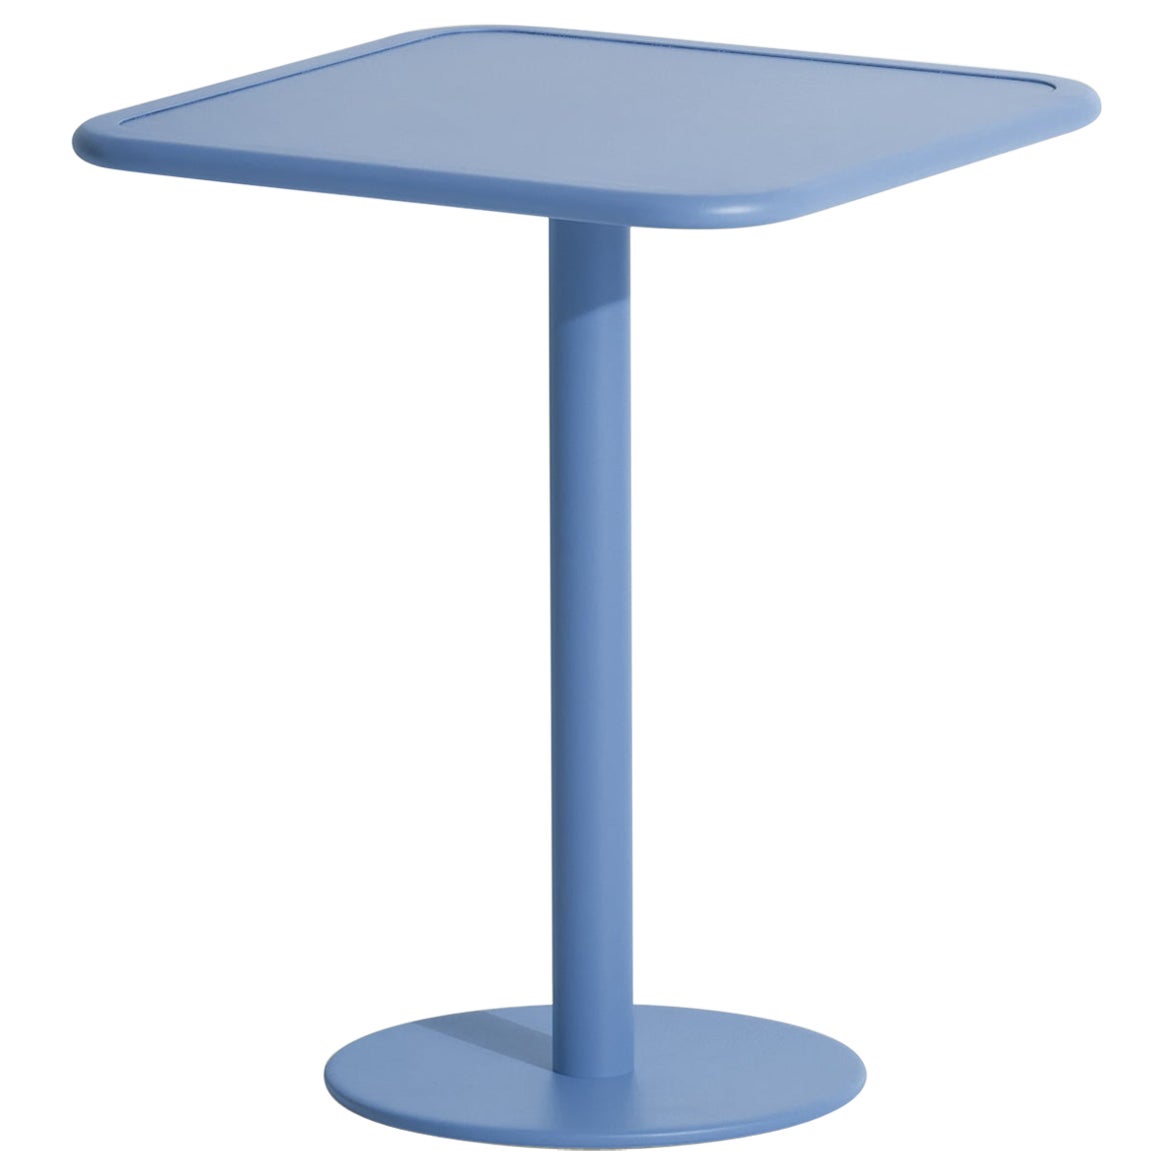 Petite Friture Week-End Bistro Square Dining Table in Azure Blue Aluminium, 2017